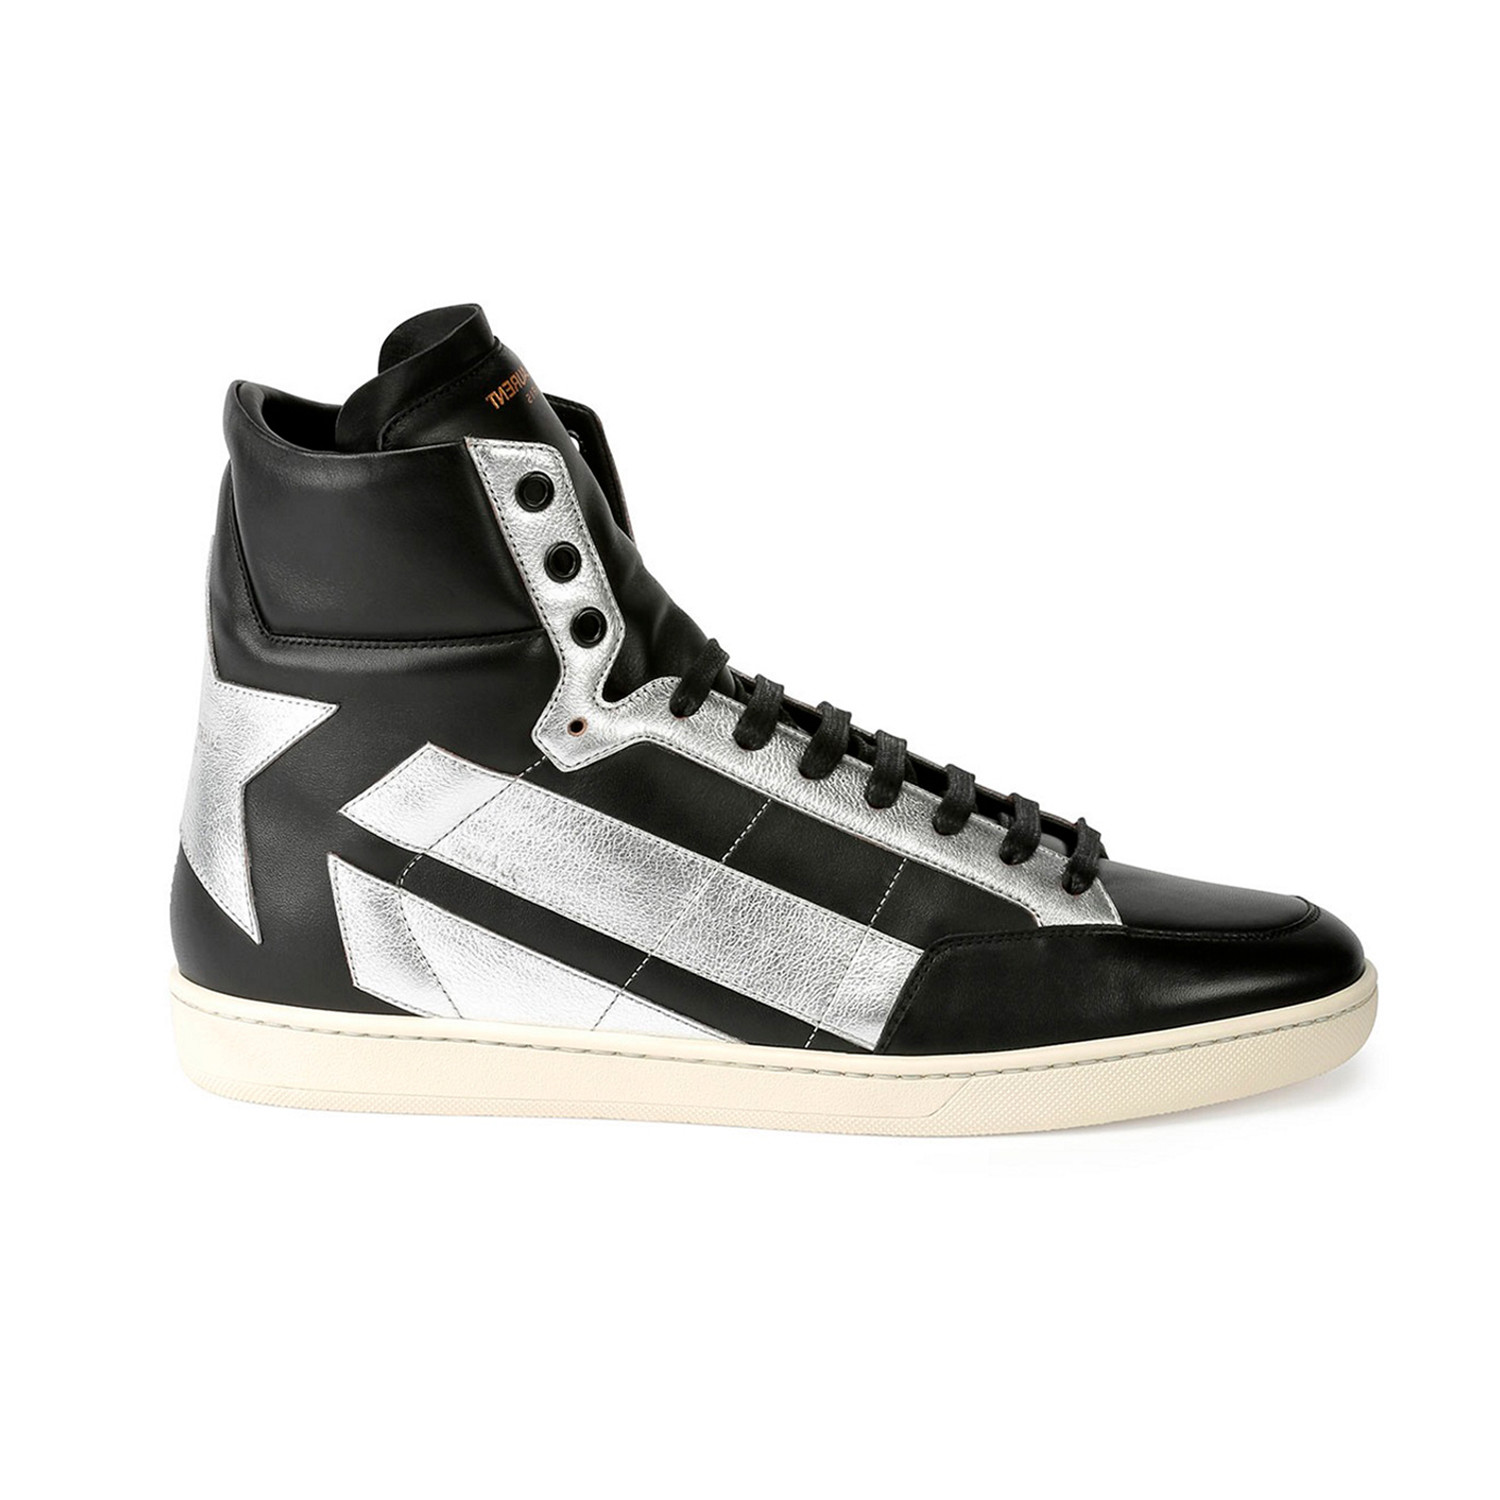 Saint Laurent // Men's Star-Back Leather High-Top Sneaker // Black + Silver  (Euro: 43.5) - Luxury Fashion - Touch of Modern